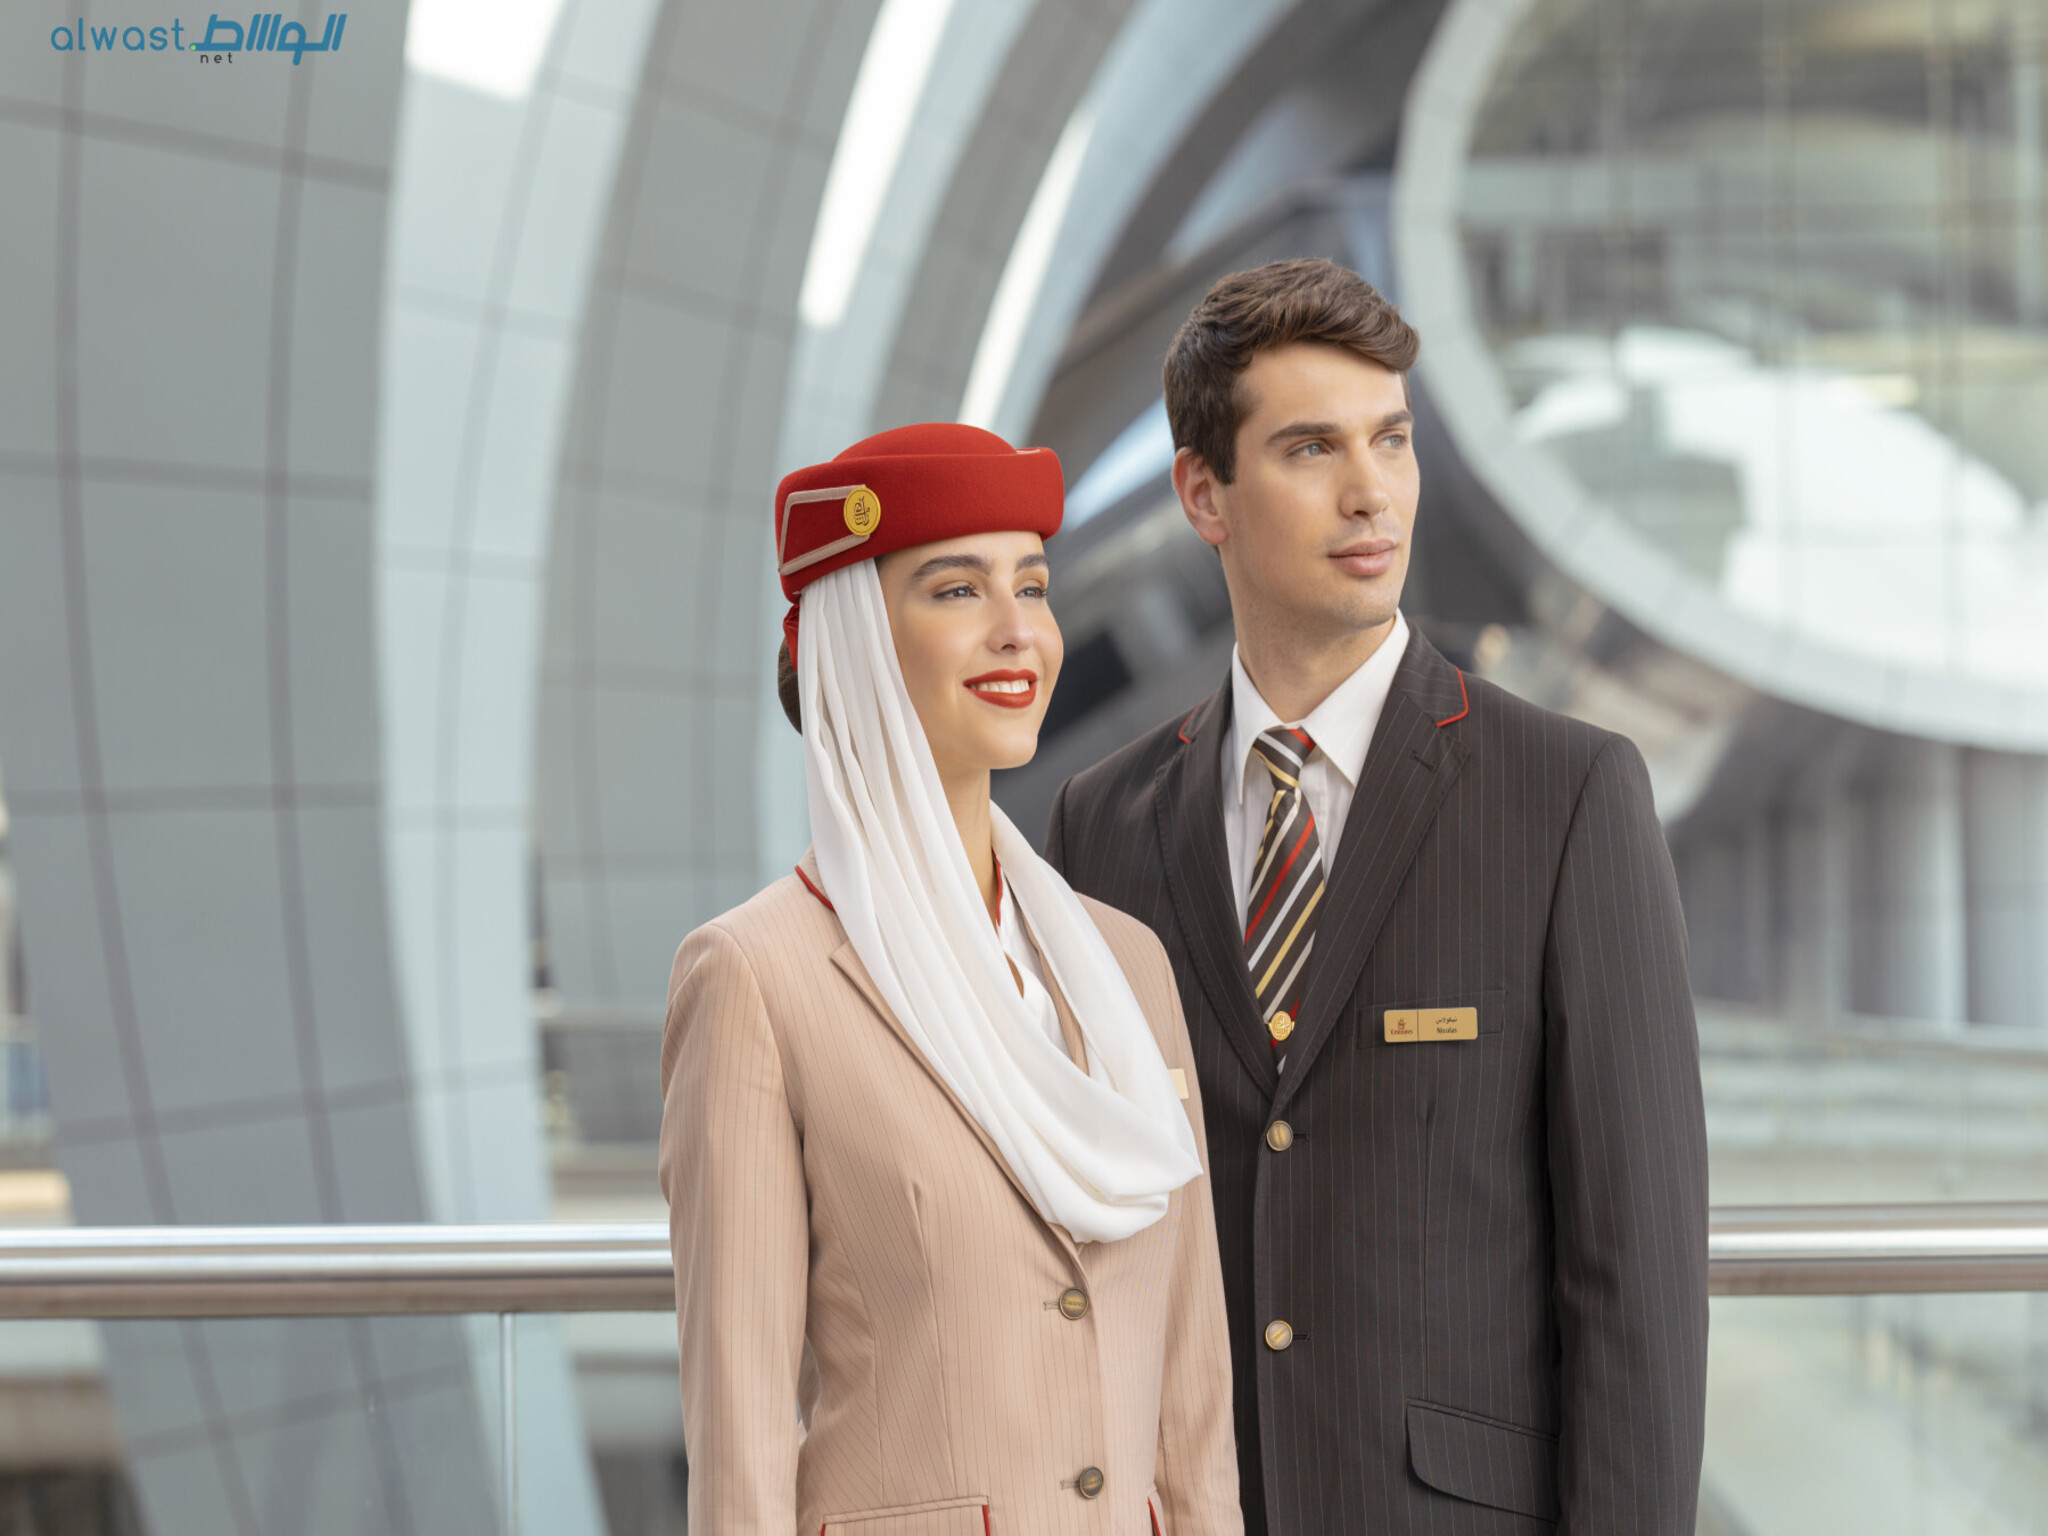 Emirates Airlines Launches Global Hiring Campaign for 5,000 Cabin Crew